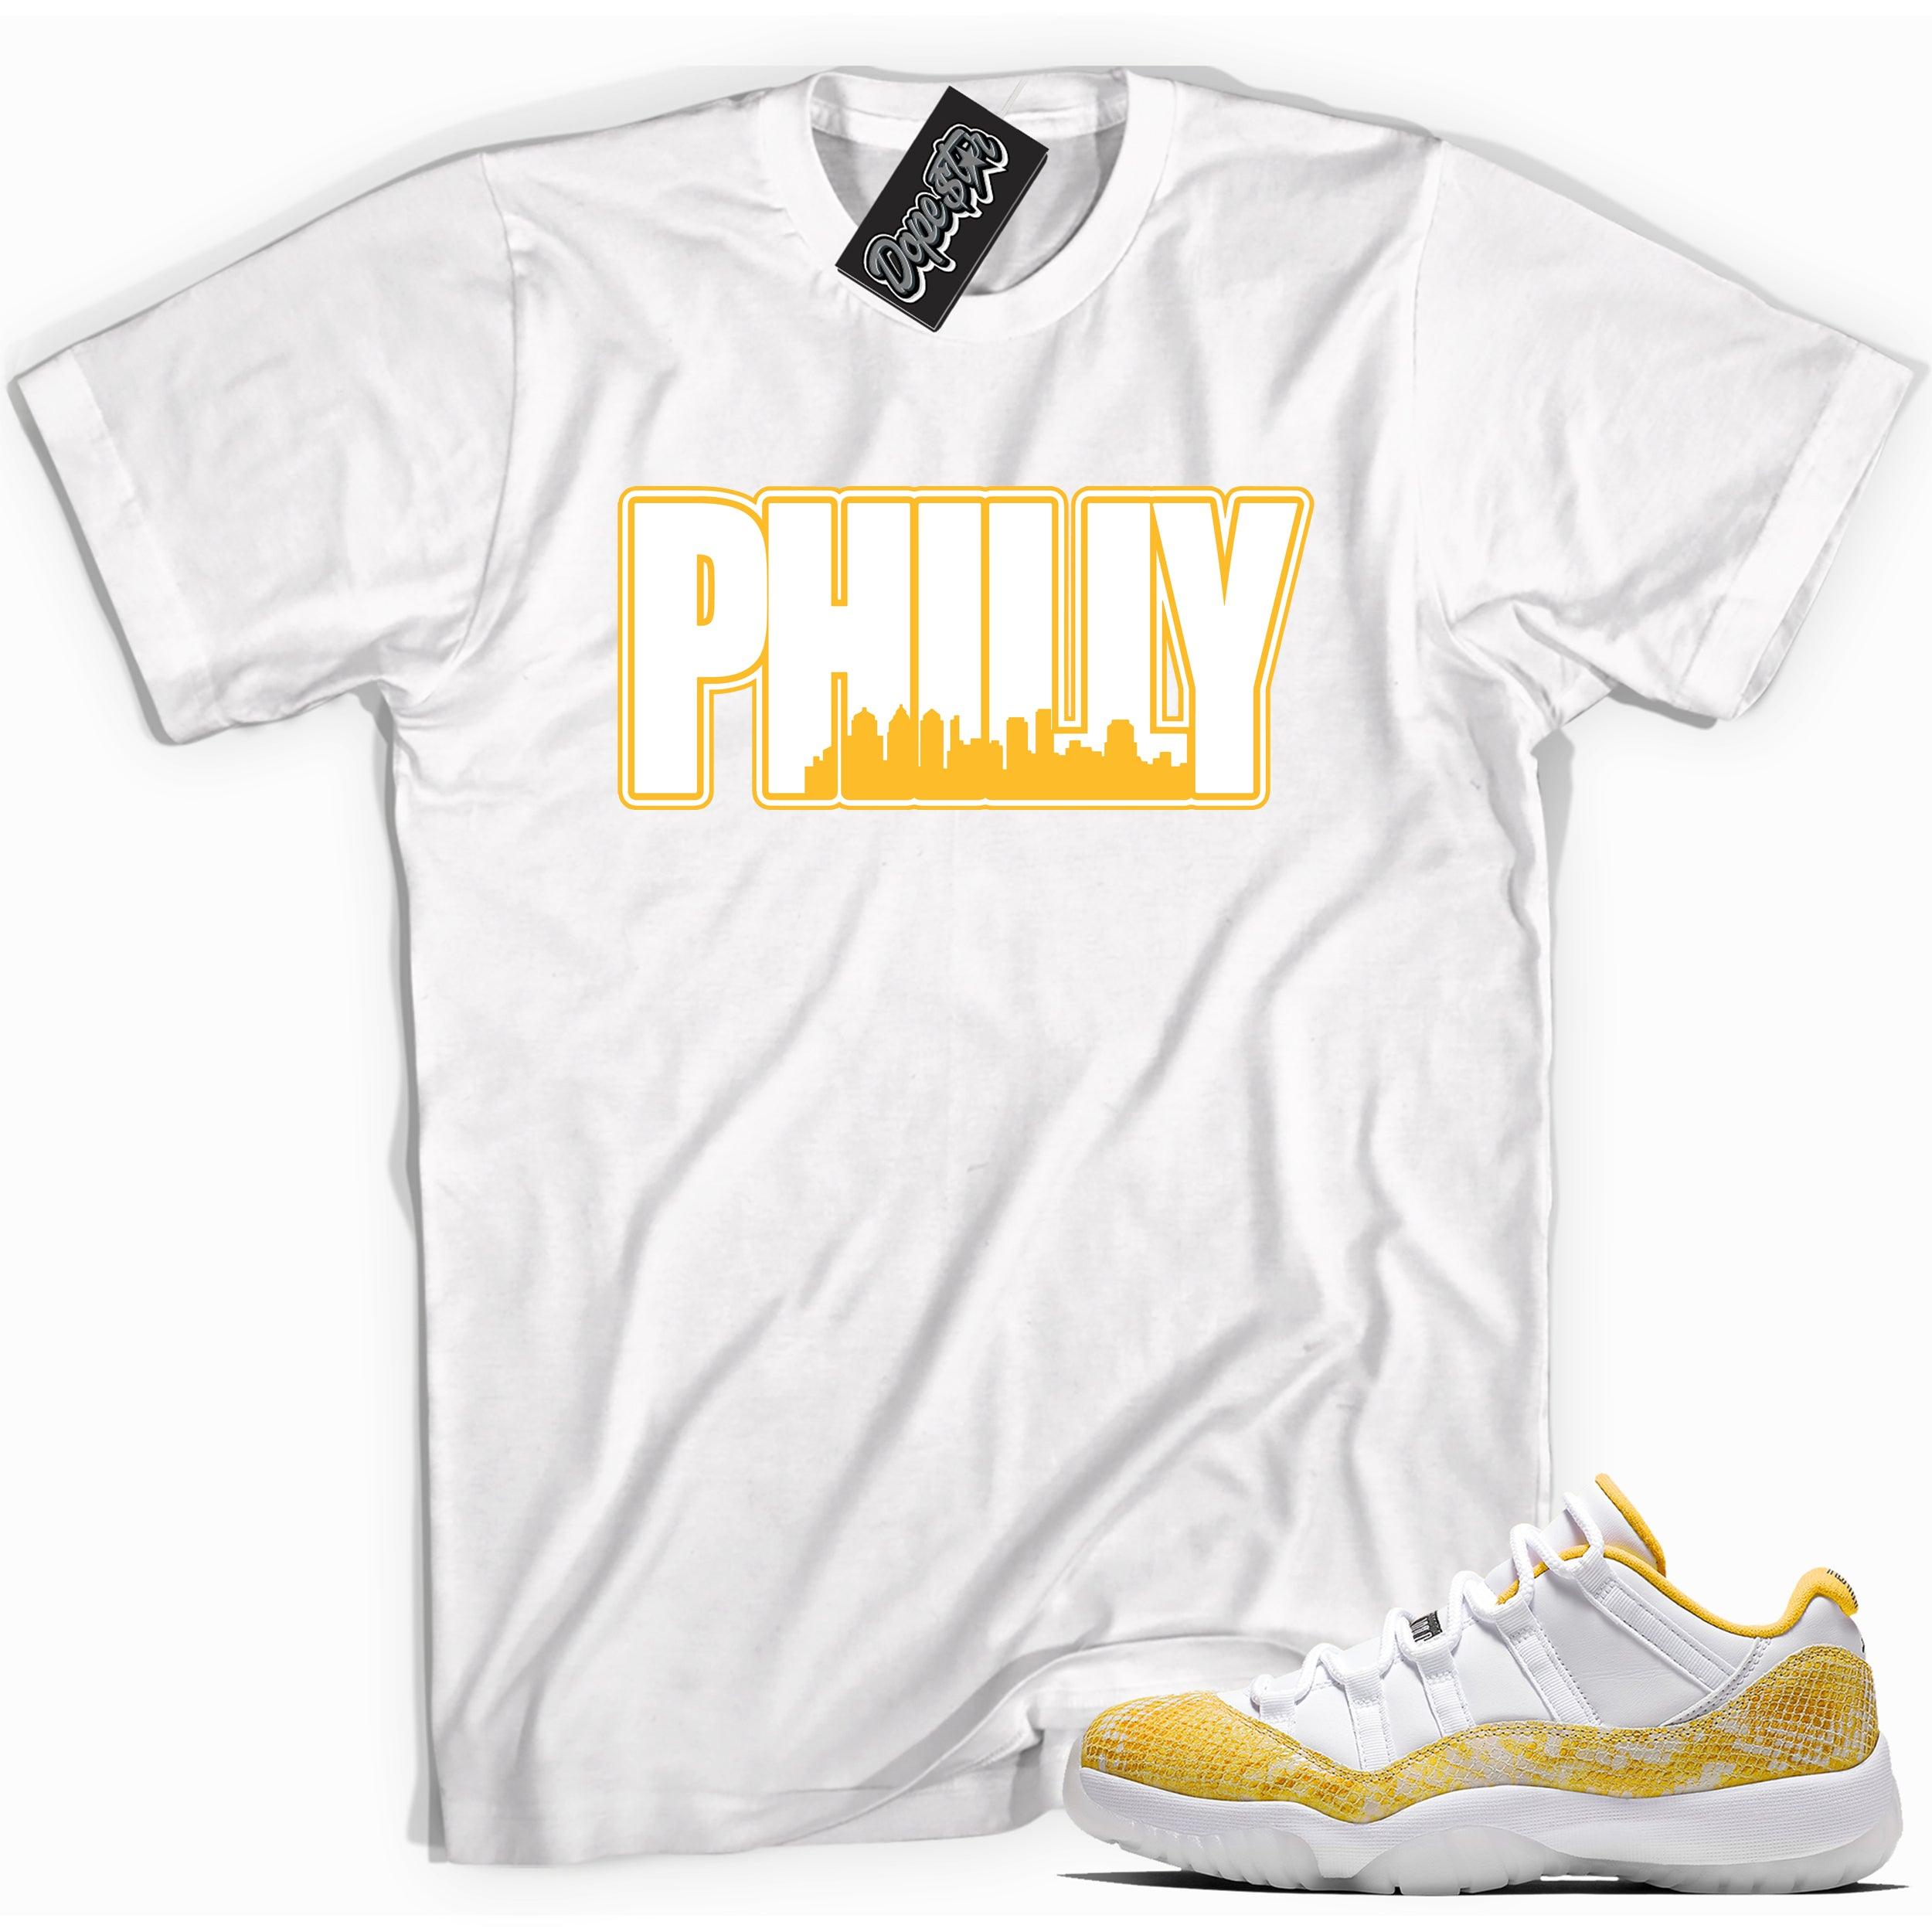 Cool white graphic tee with 'philly' print, that perfectly matches Air Jordan 11 Retro Low Yellow Snakeskin sneakers